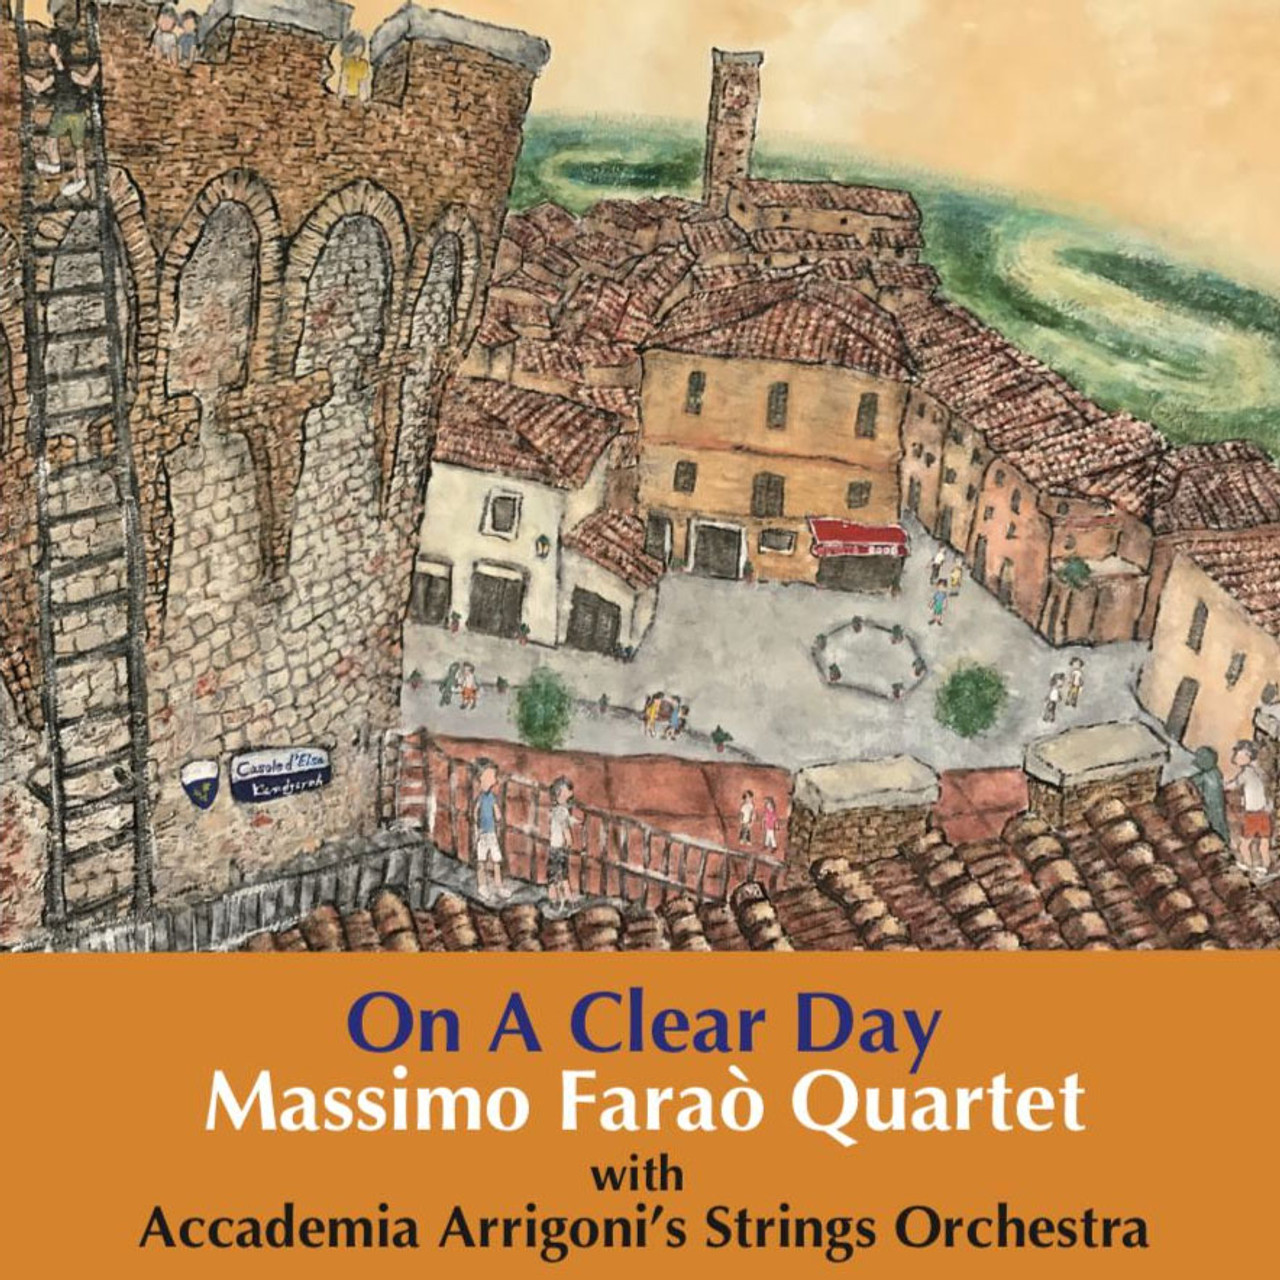 On a Clear Day with Accademia Arrigoni's Strings Orchestra